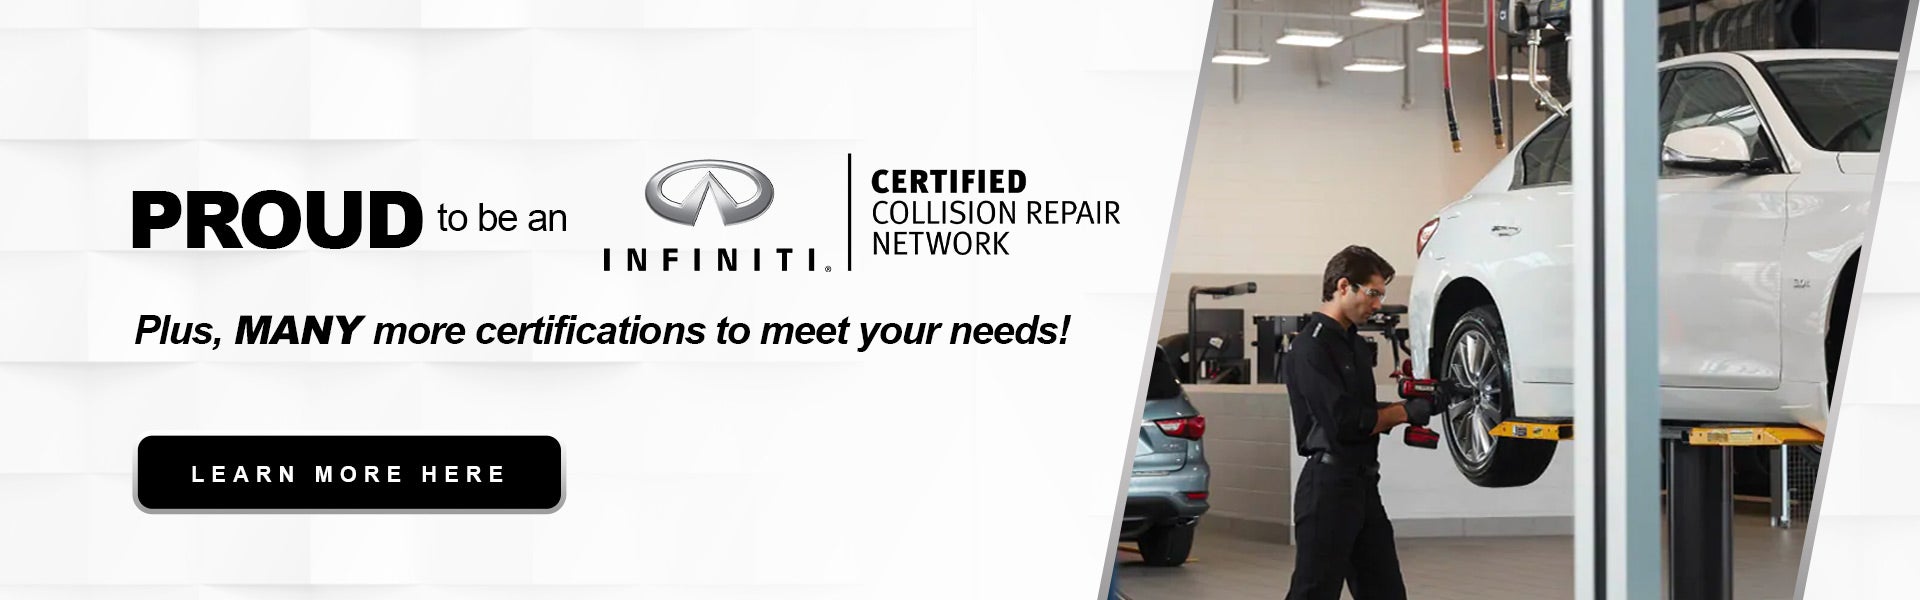 Proud to be an Infiniti Certified Collision Specialist